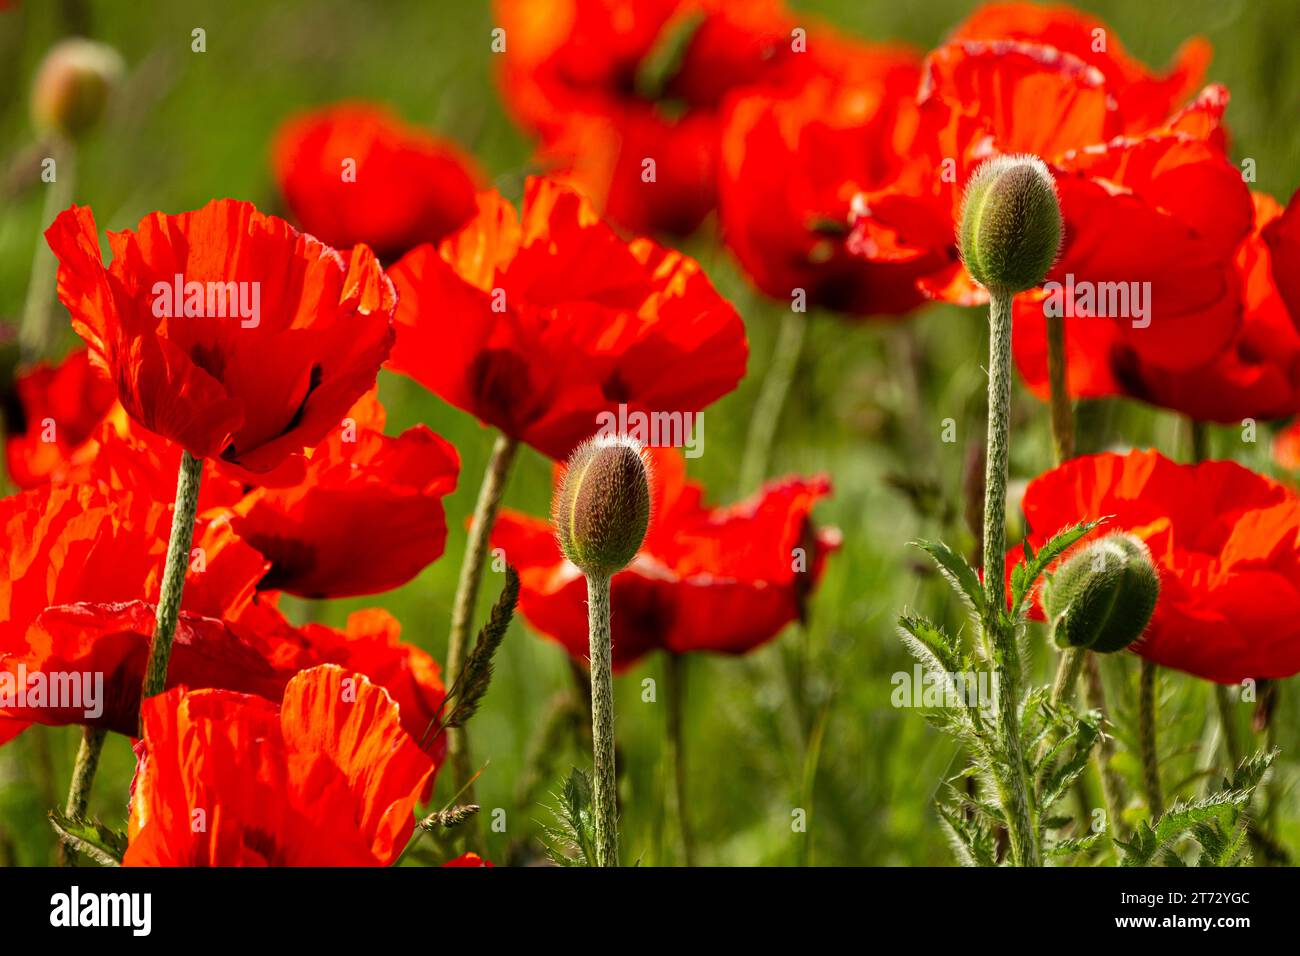 Display of giant poppies along the roadside by Banburgh castle, Northumberland. Stock Photo